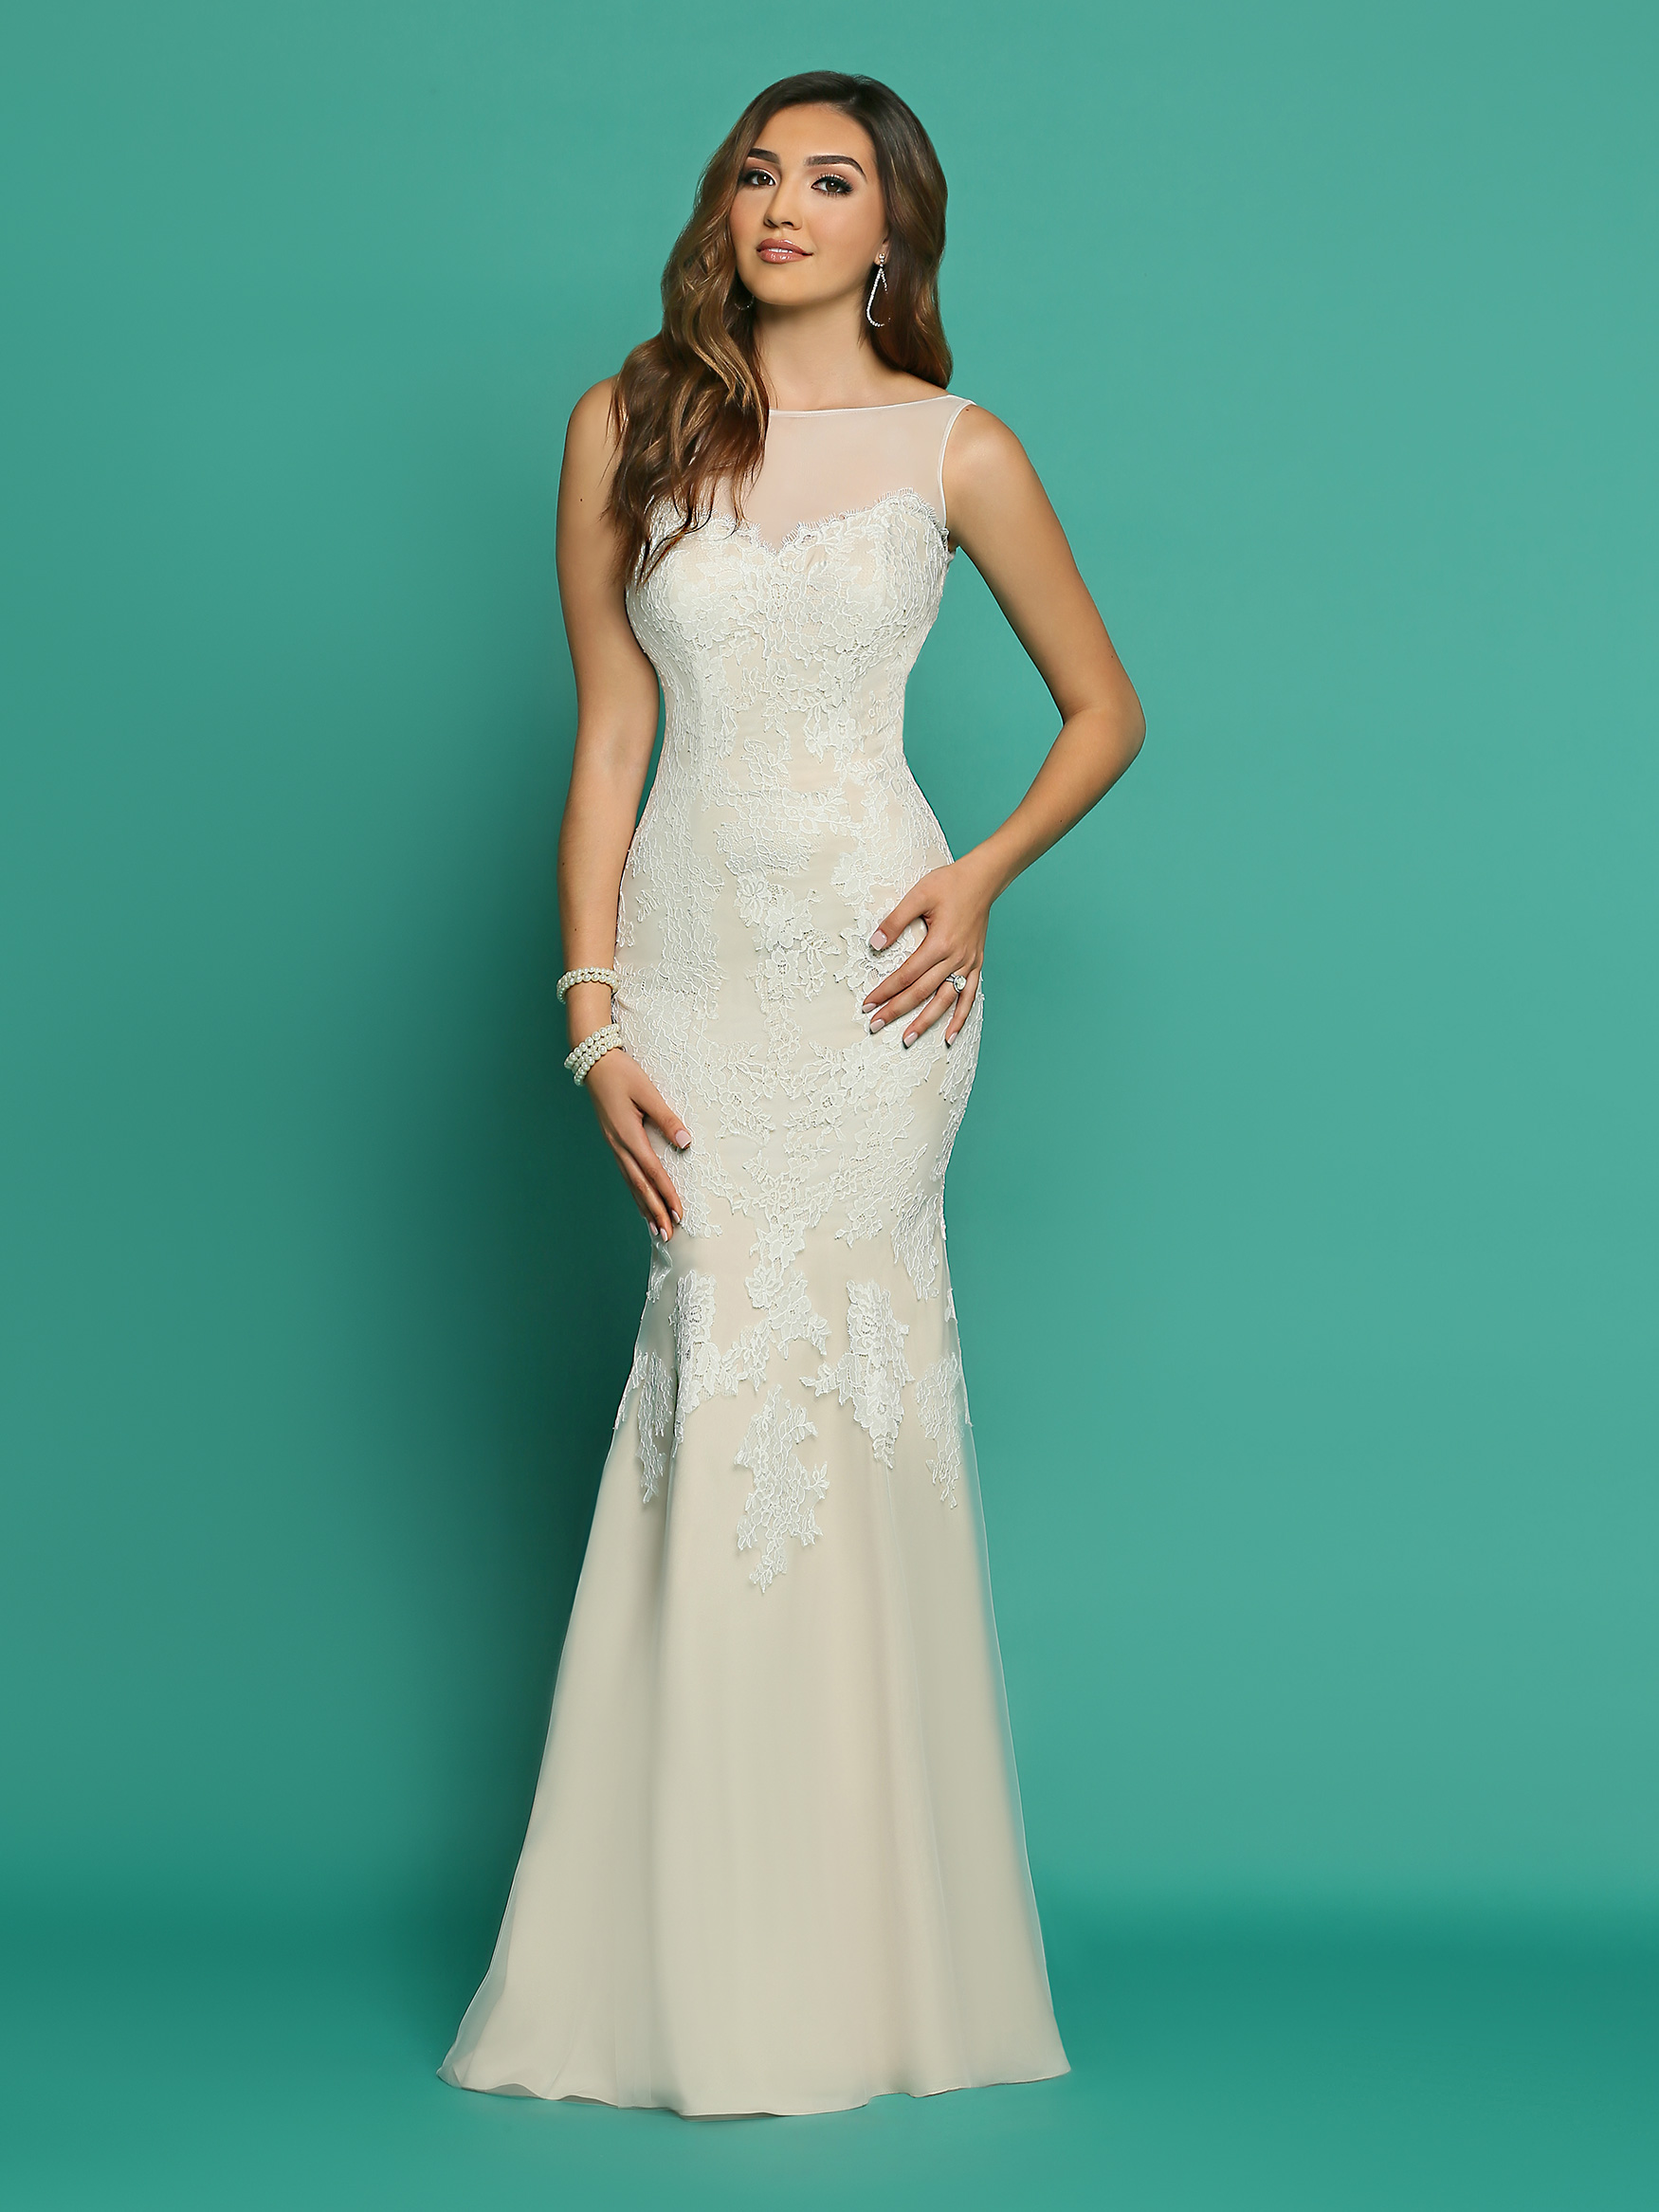 Some brief guidance for casual
wedding  dresses for women